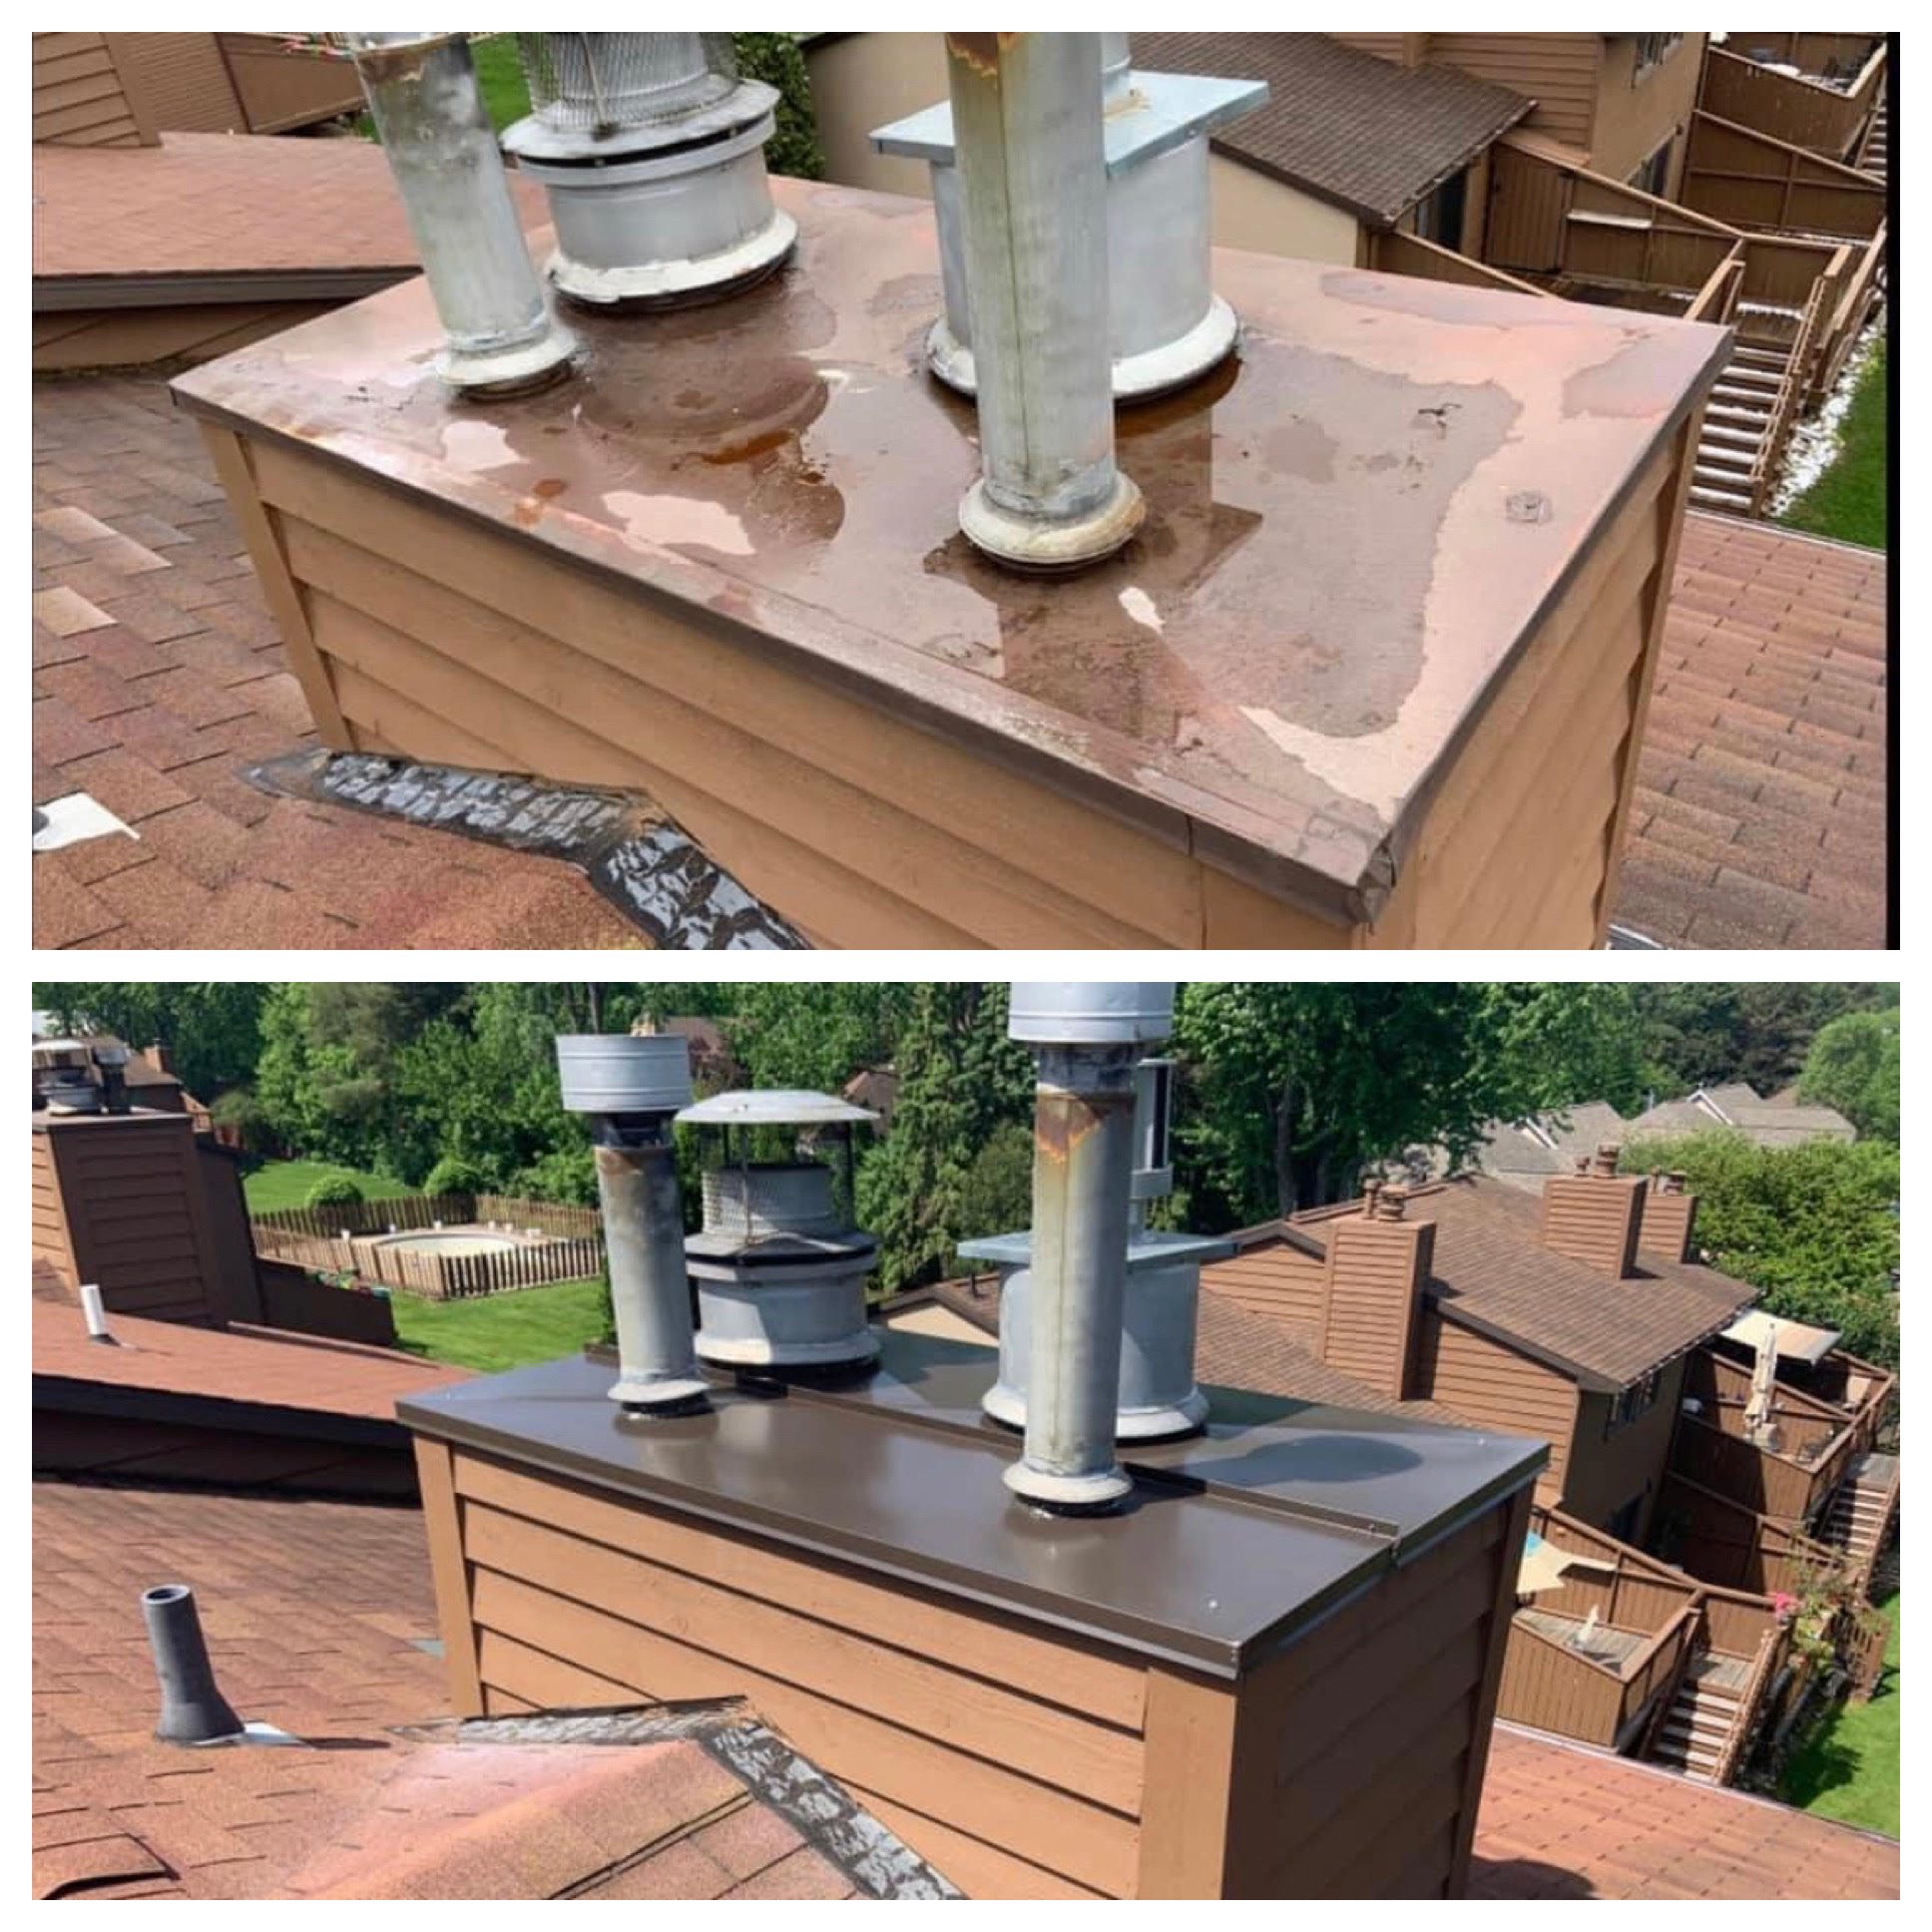 Before and After Chimney Cap